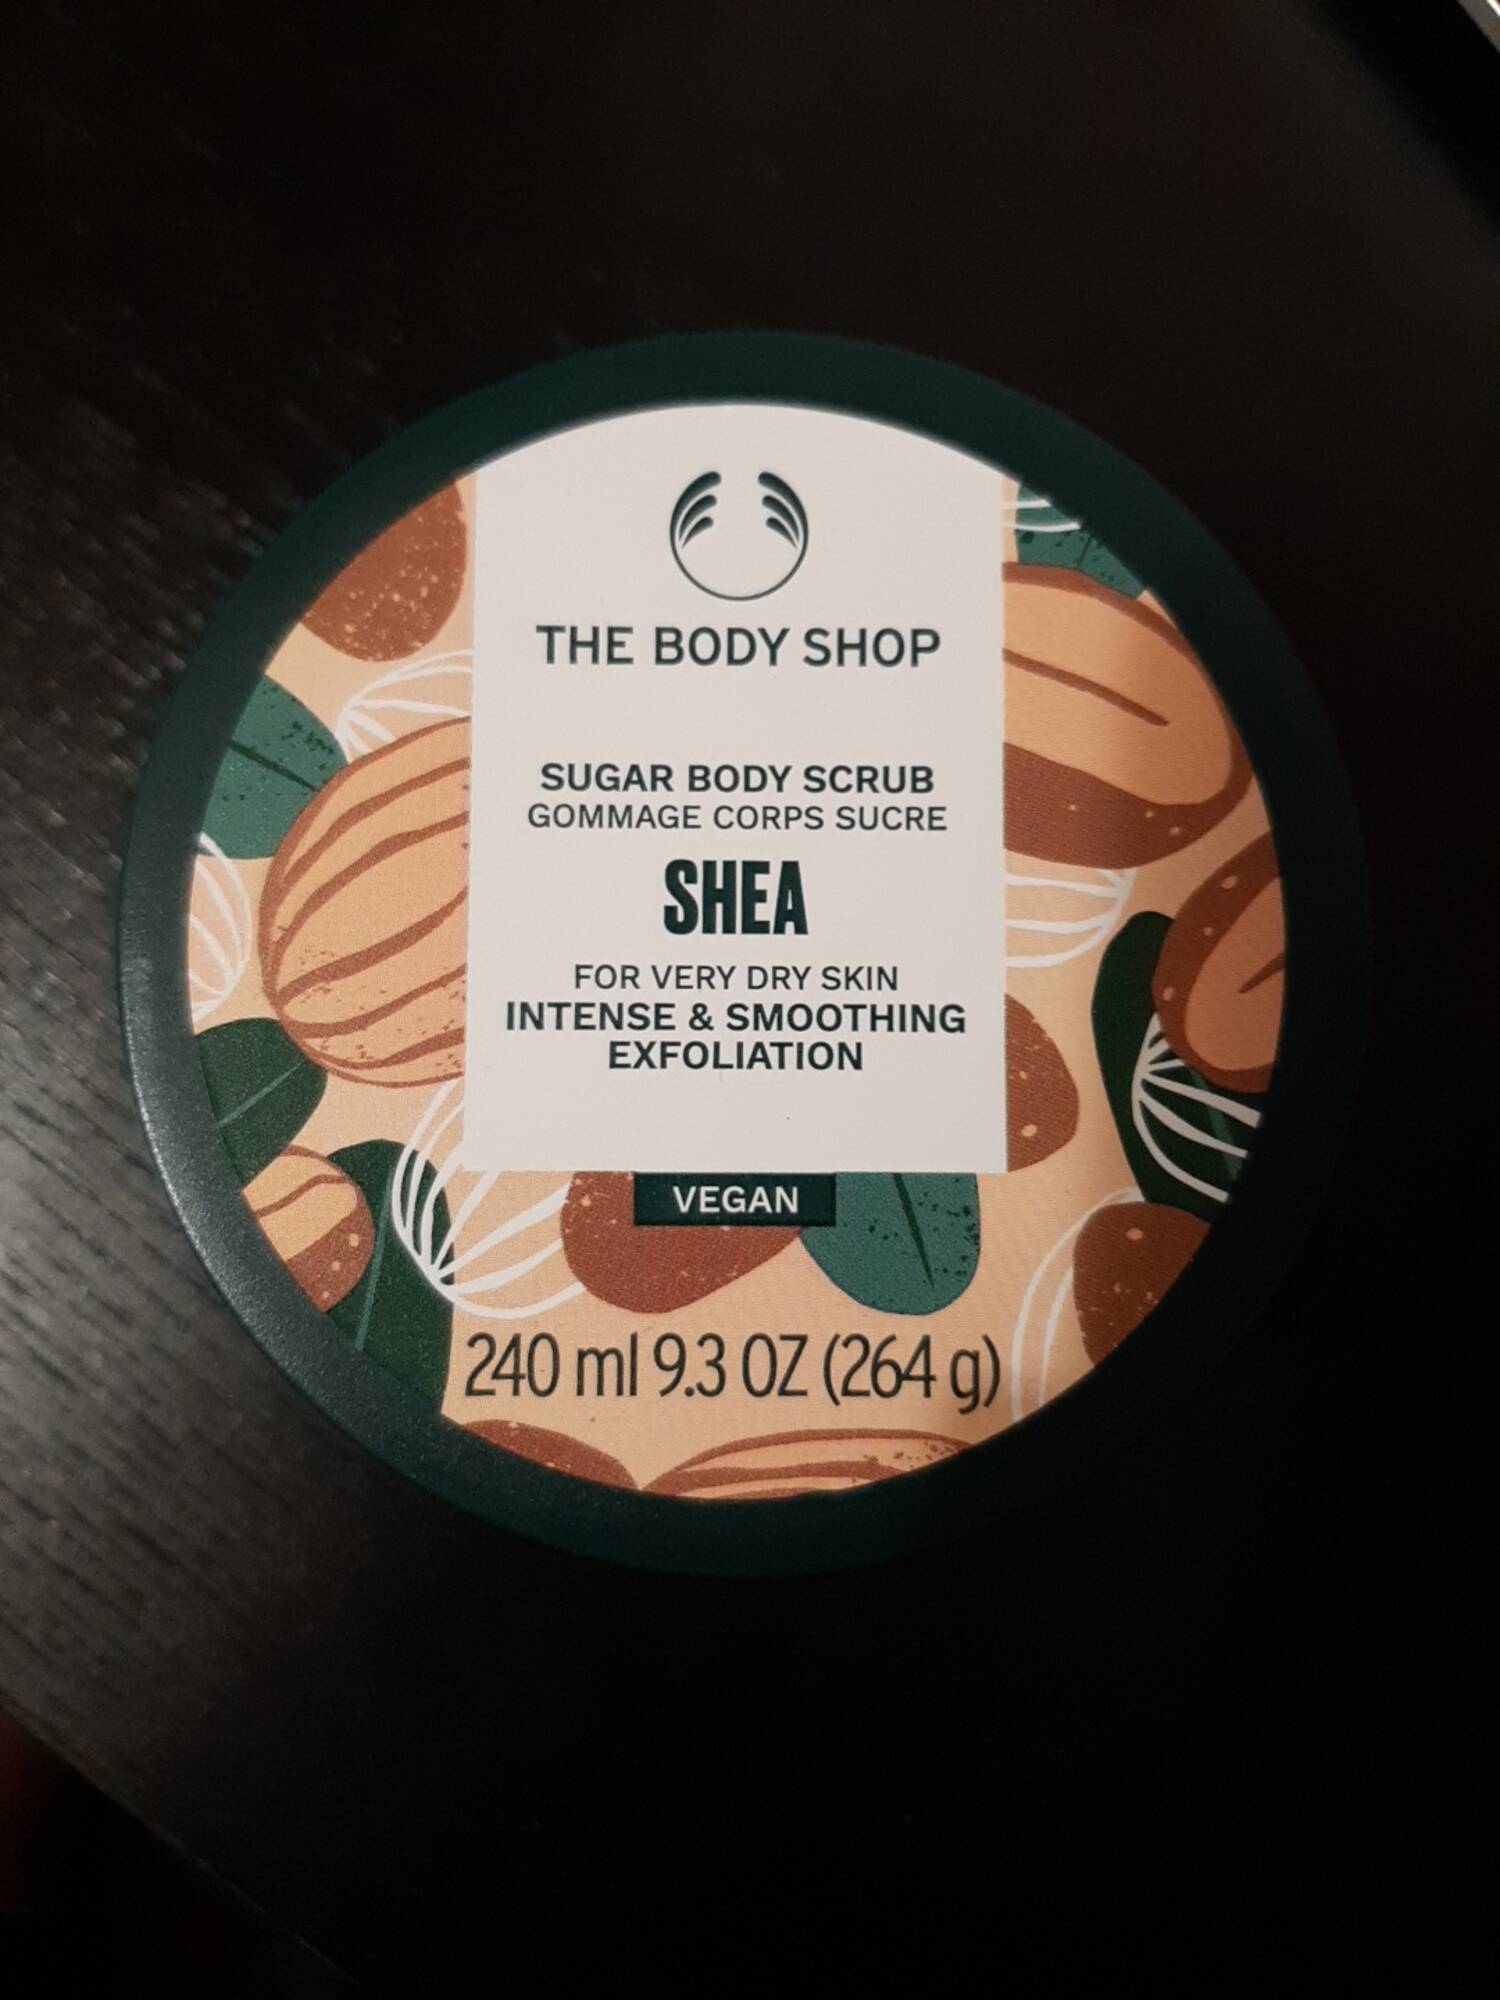 THE BODY SHOP - Shea for very dry skin